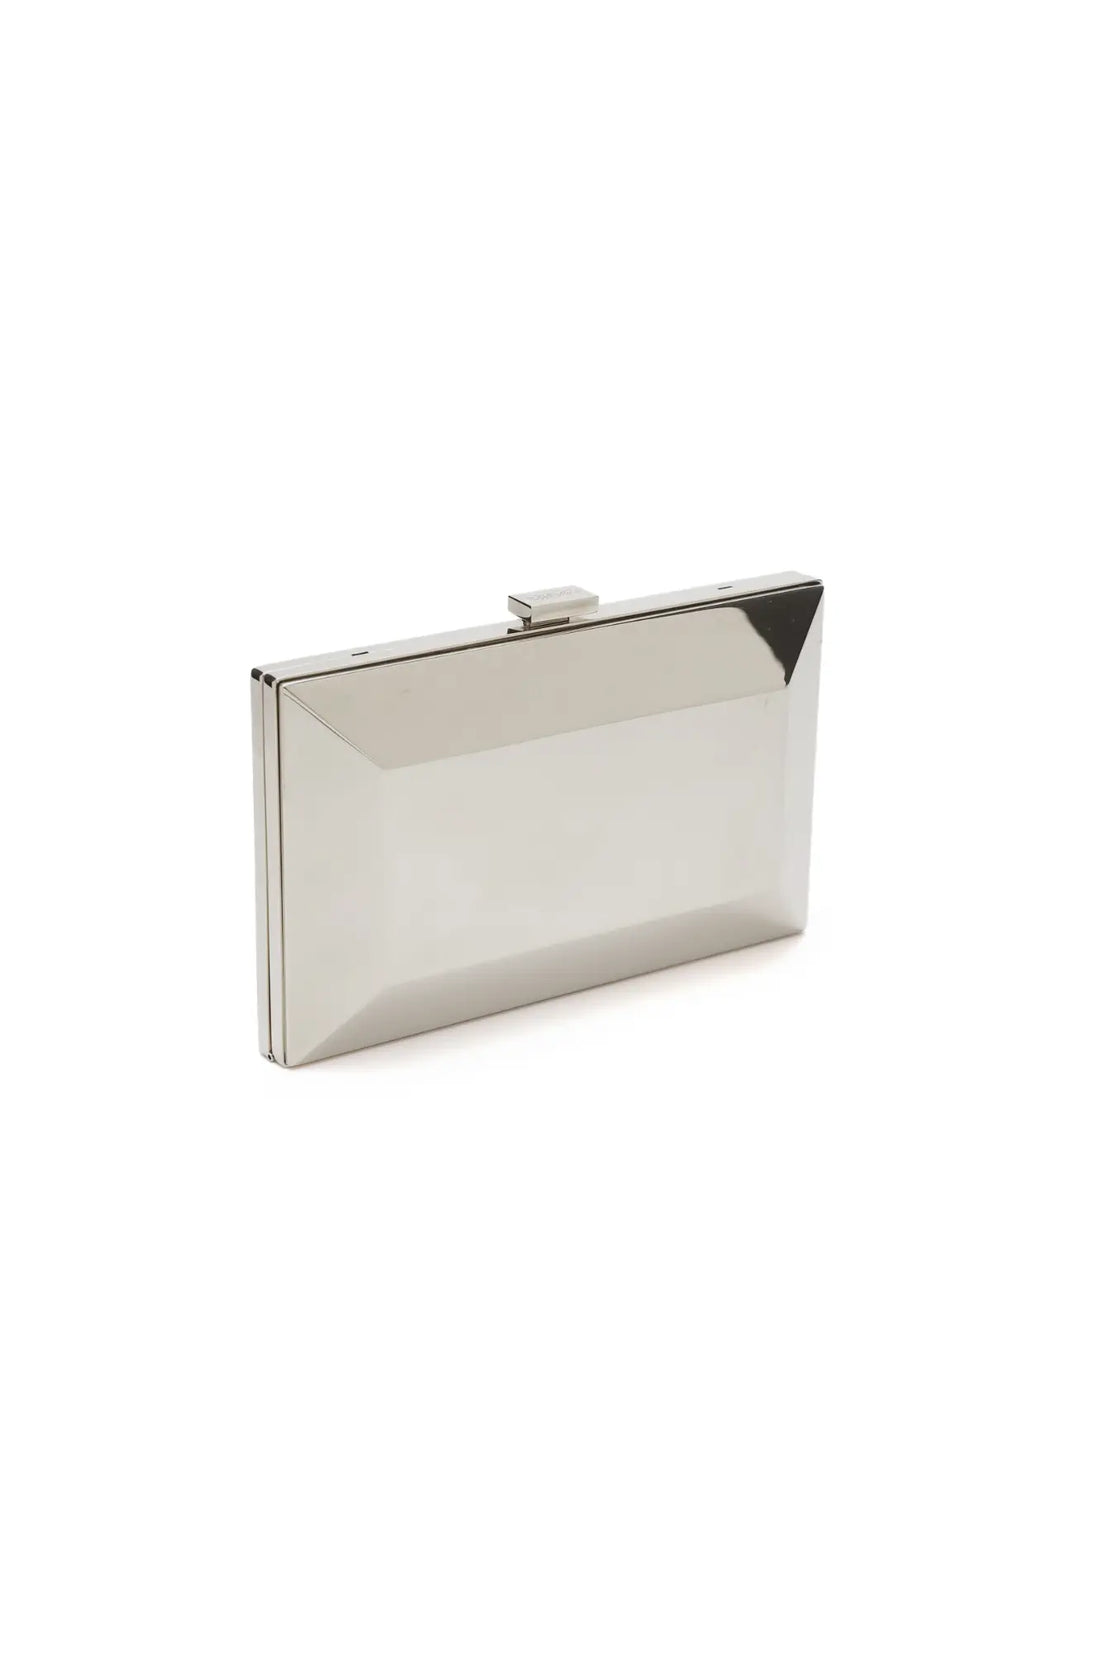 Italian craftsmanship Milan Clutch x MICAELA - Silver Metallic purse by The Bella Rosa Collection on a white background.